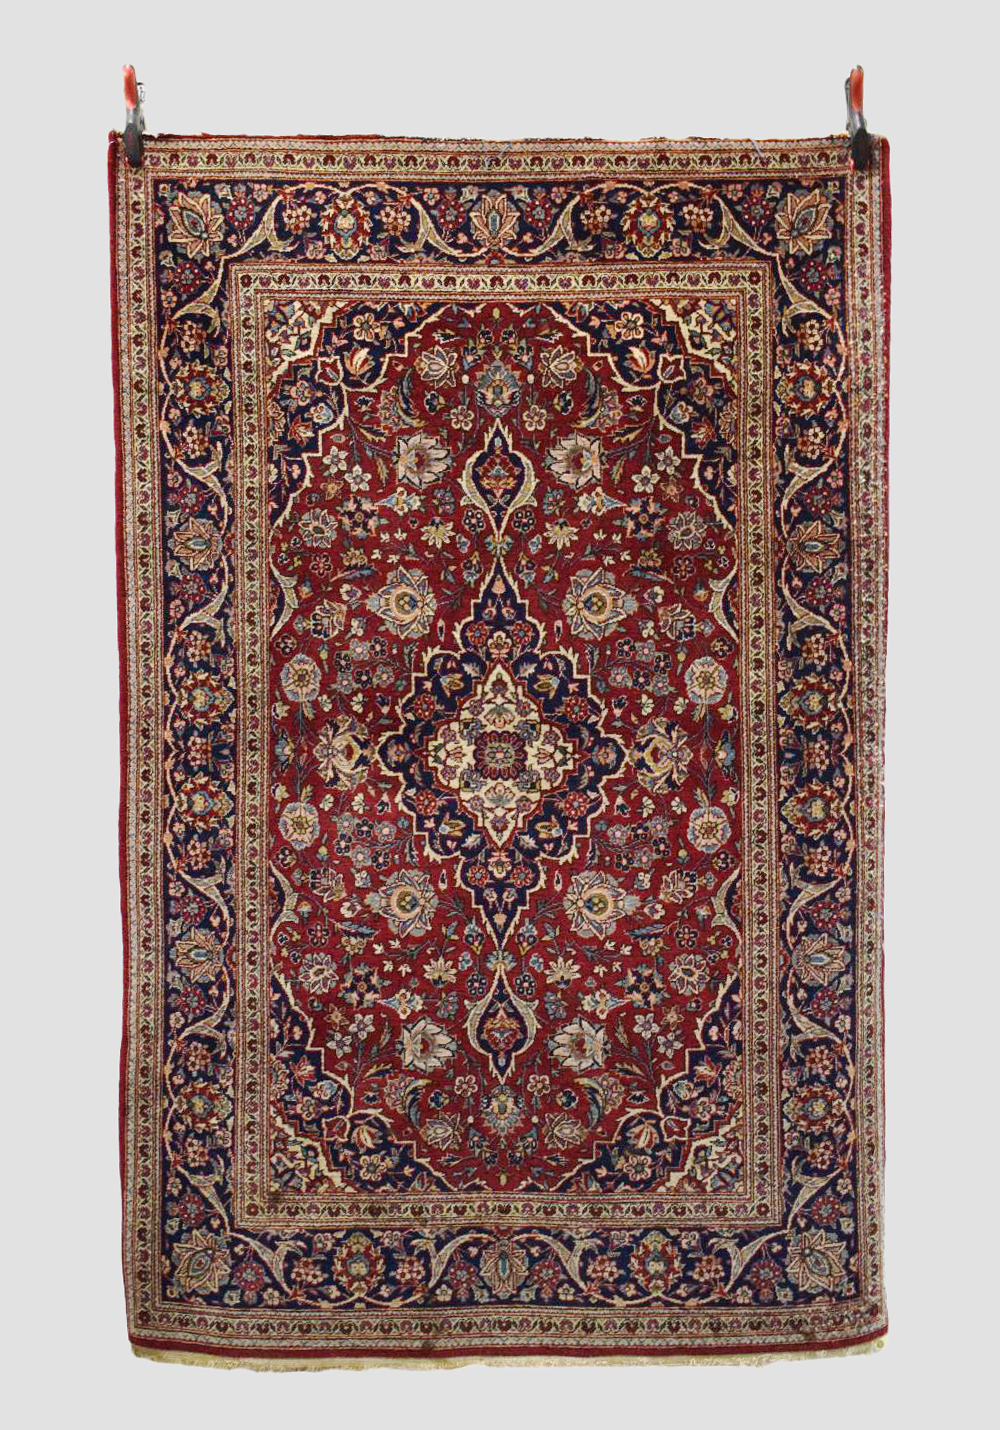 Kashan rug, west Persia, circa 1940s-50s, 6ft. 10in. X 4ft. 4in. 2.08m. x 1.32m. Slight loss to